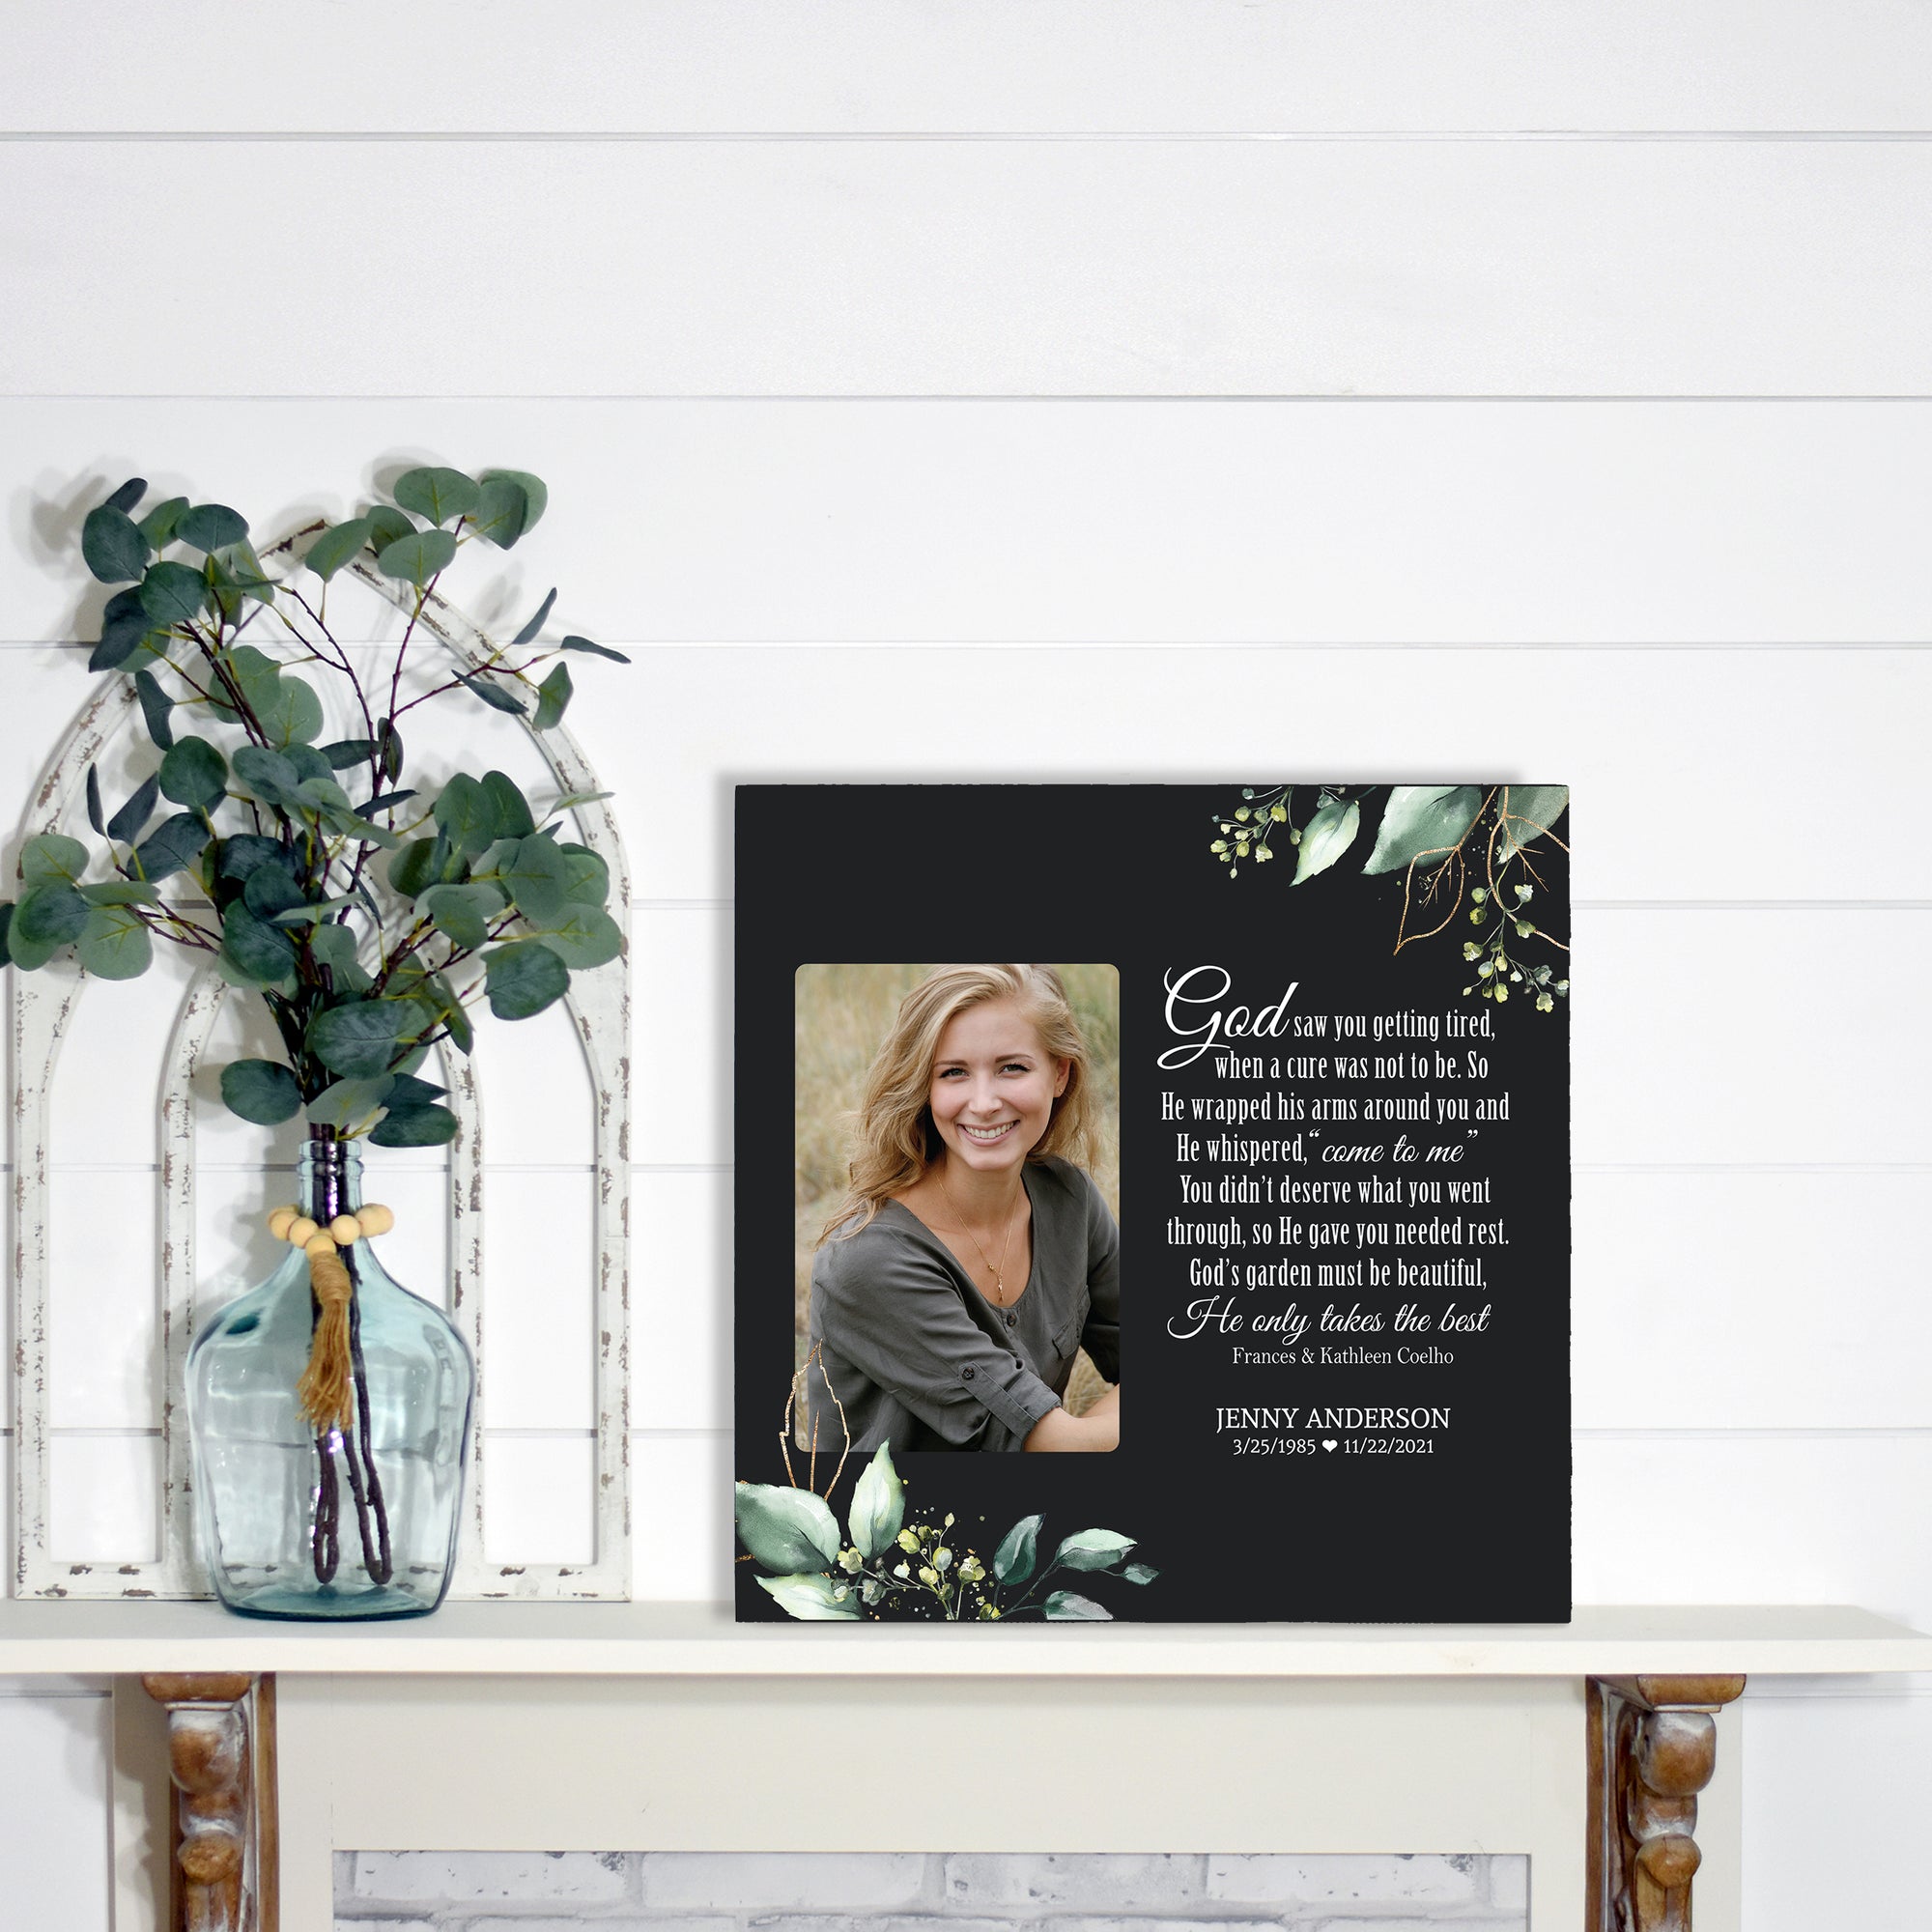 Timeless Human Memorial Shadow Box Photo Urn in Black - God Saw You Getting Tired